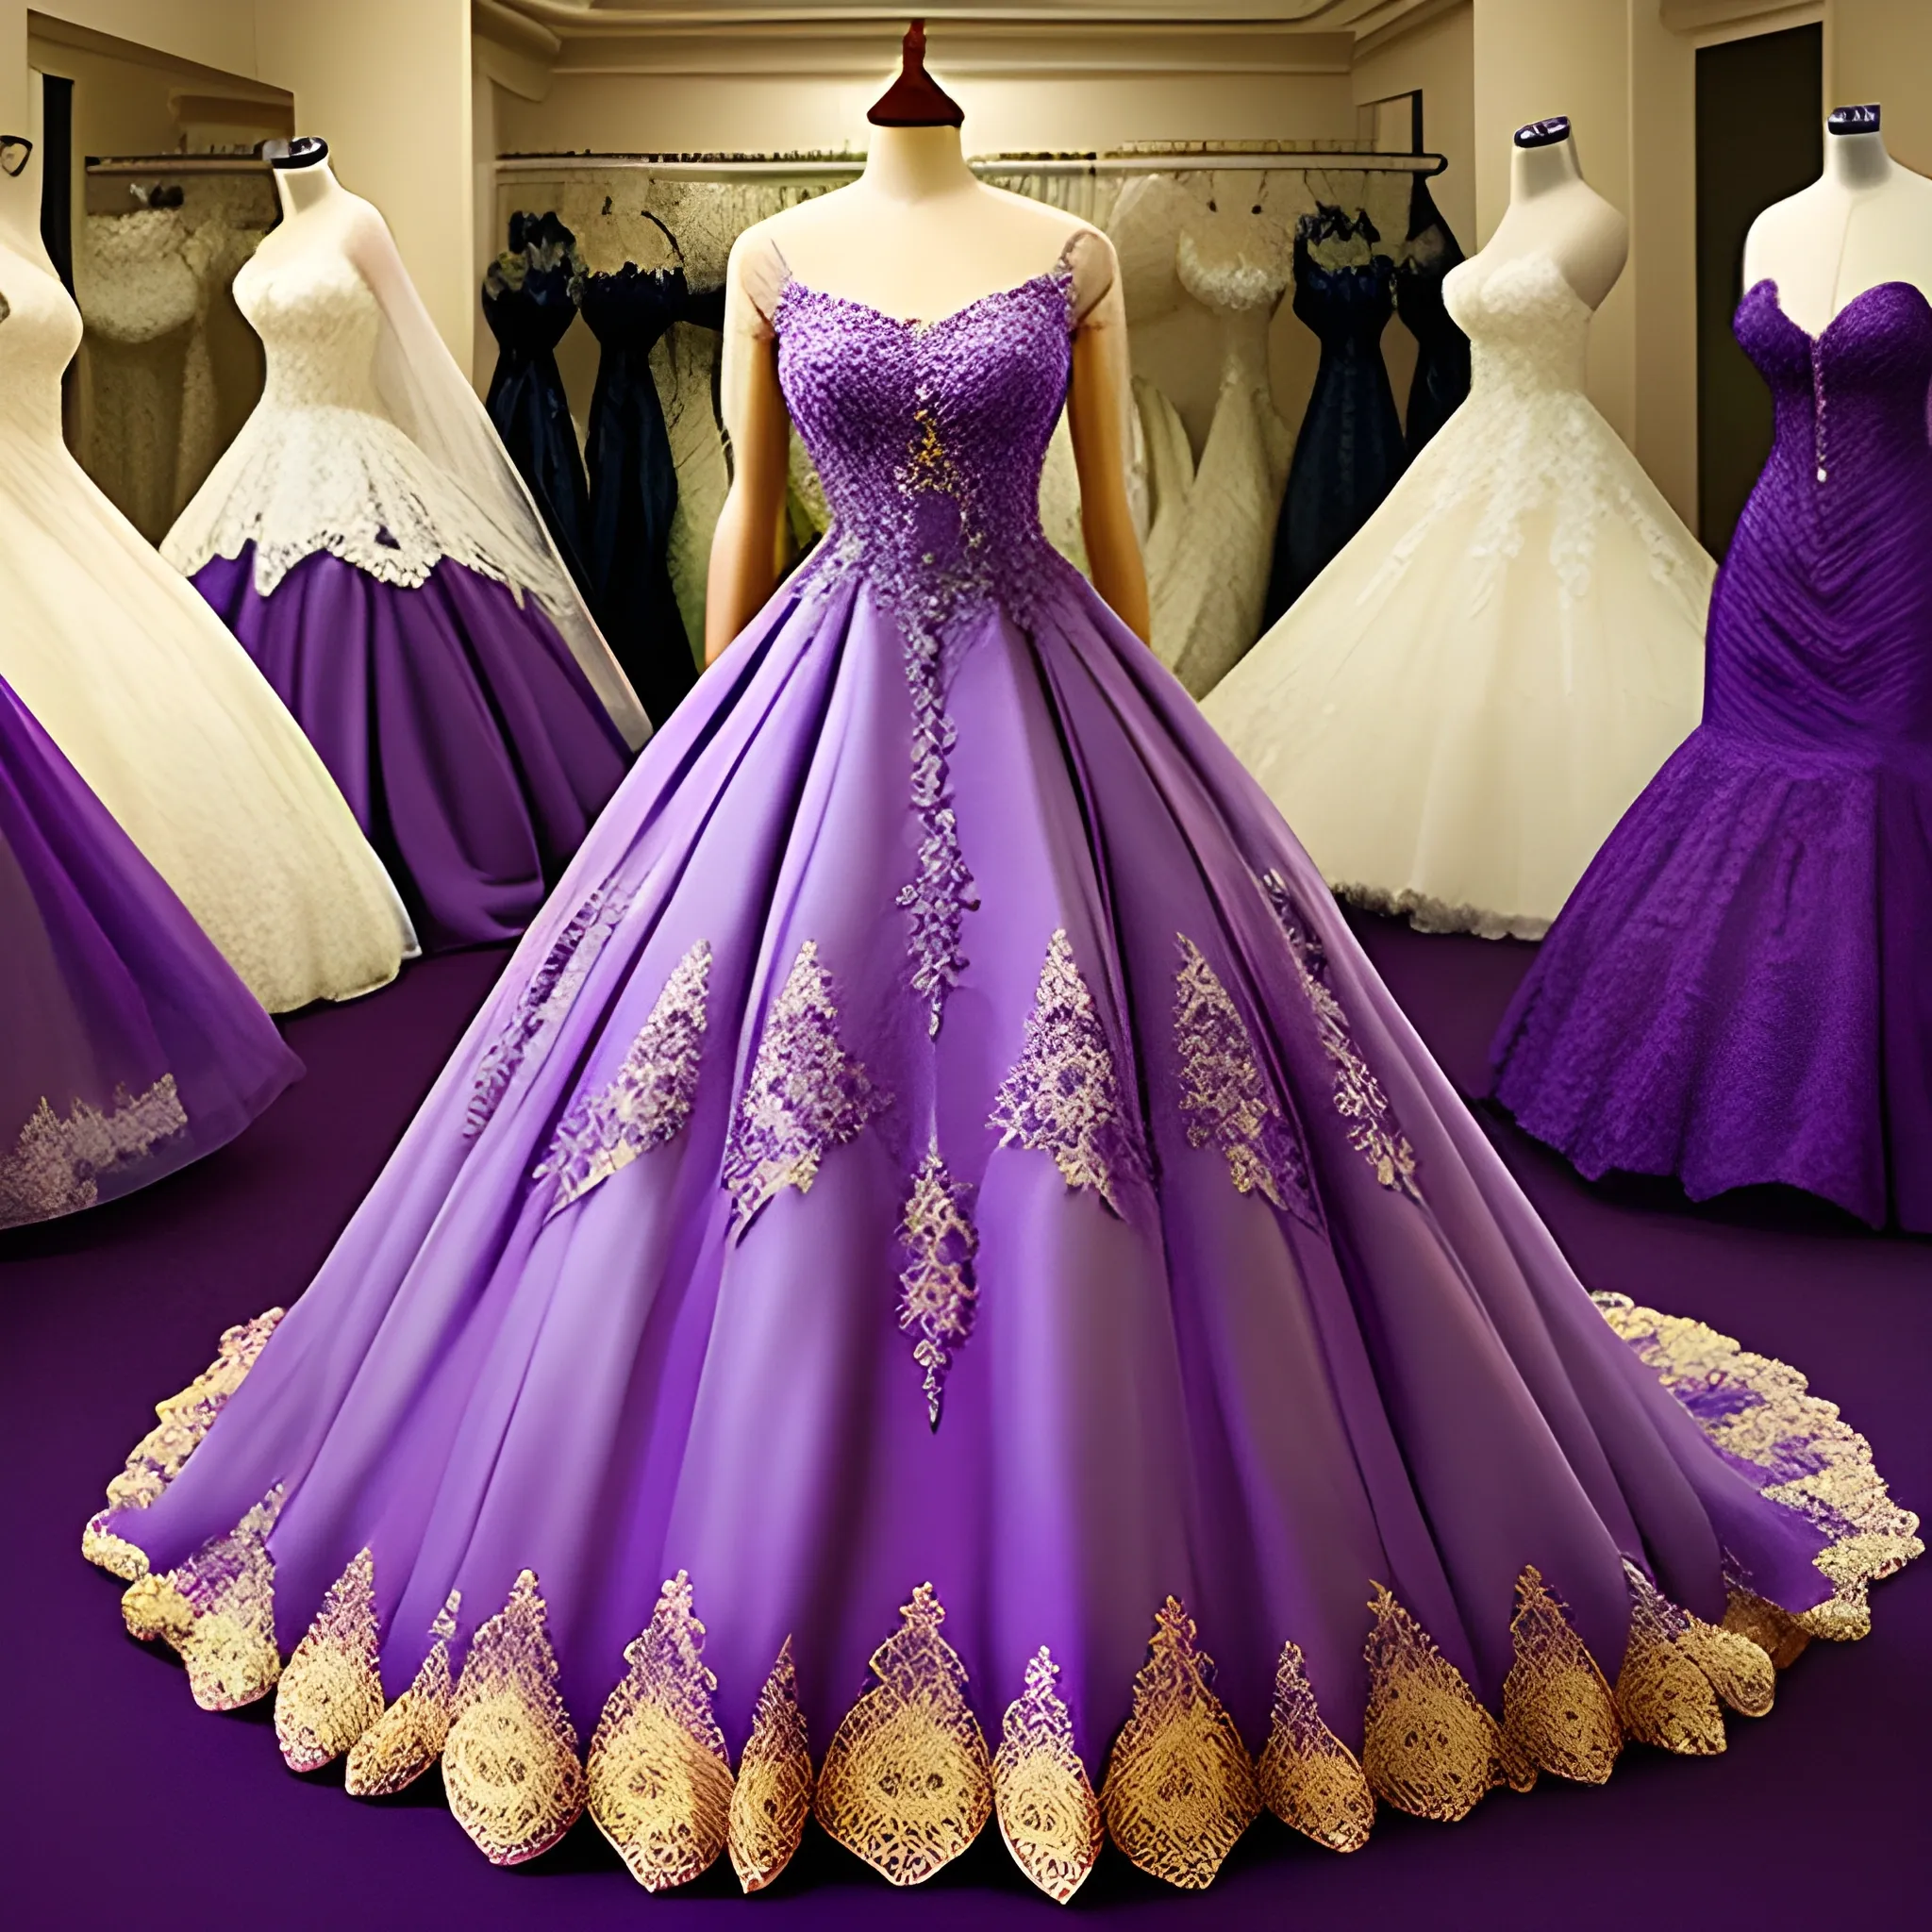 Intricate fantasy wedding gown purple and gold lace goddess dream dress puffy 